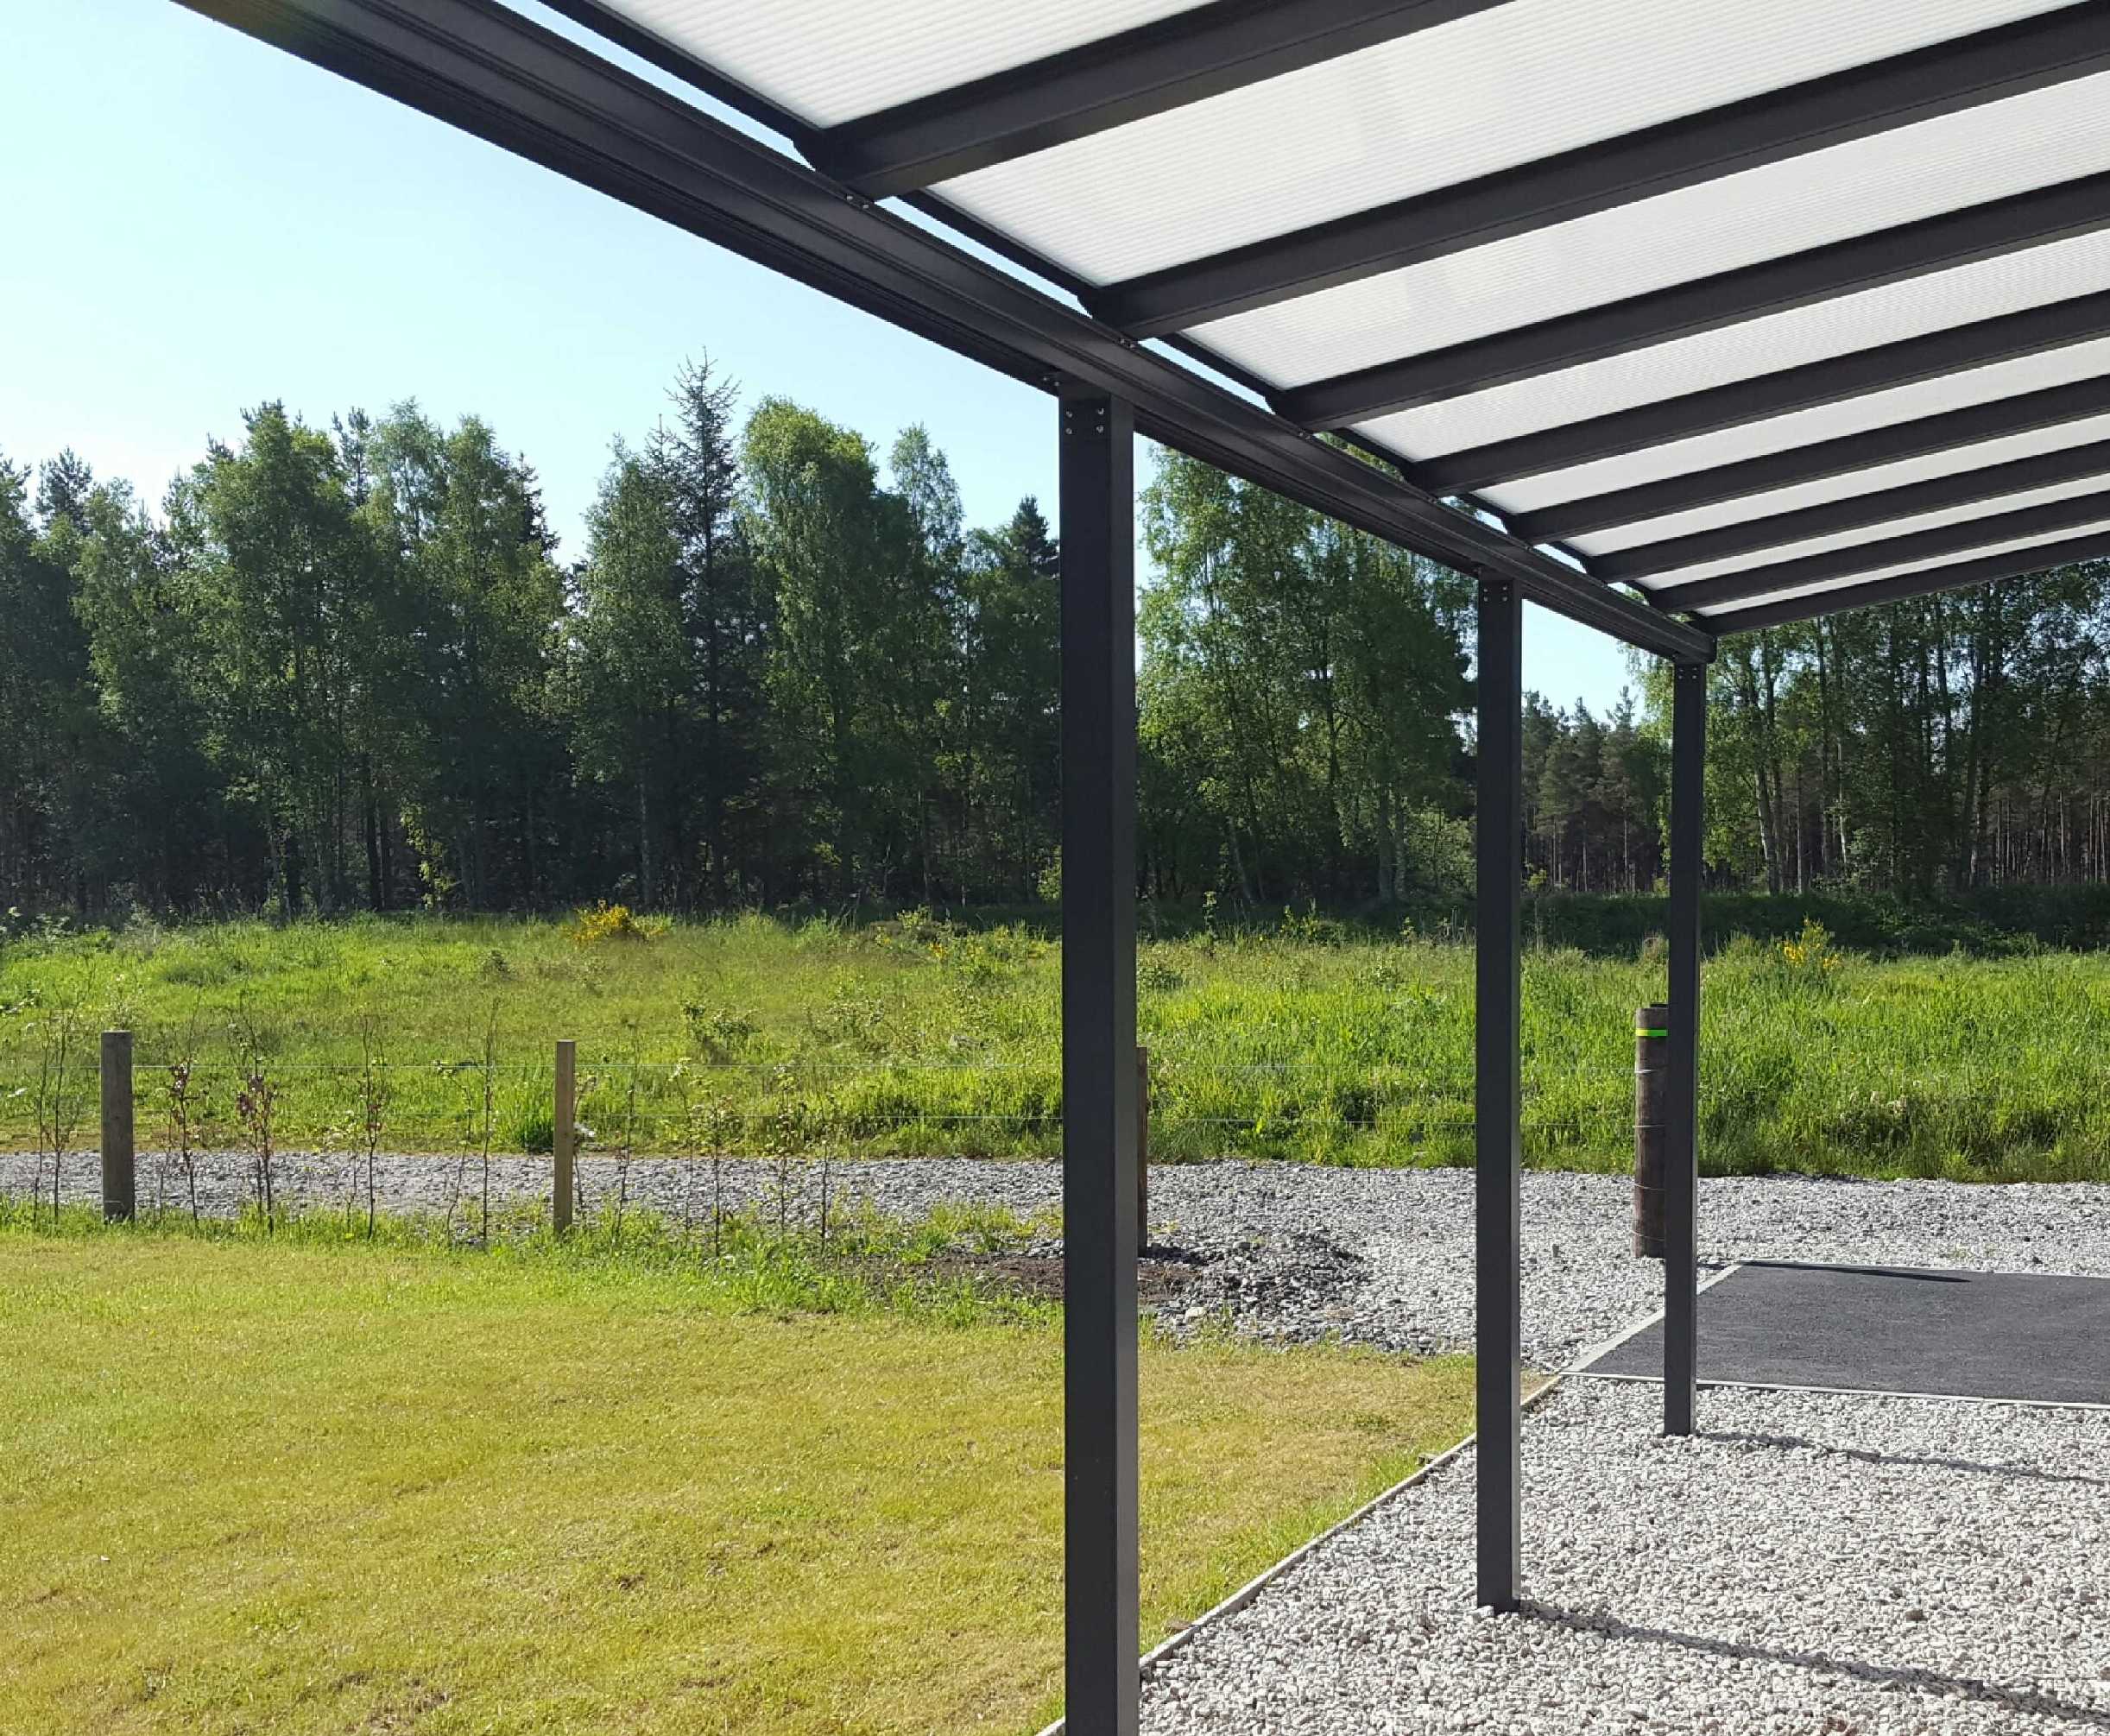 Omega Smart Lean-To Canopy, Anthracite Grey, 6mm Glass Clear Plate Polycarbonate Glazing - 2.8m (W) x 2.0m (P), (2) Supporting Posts